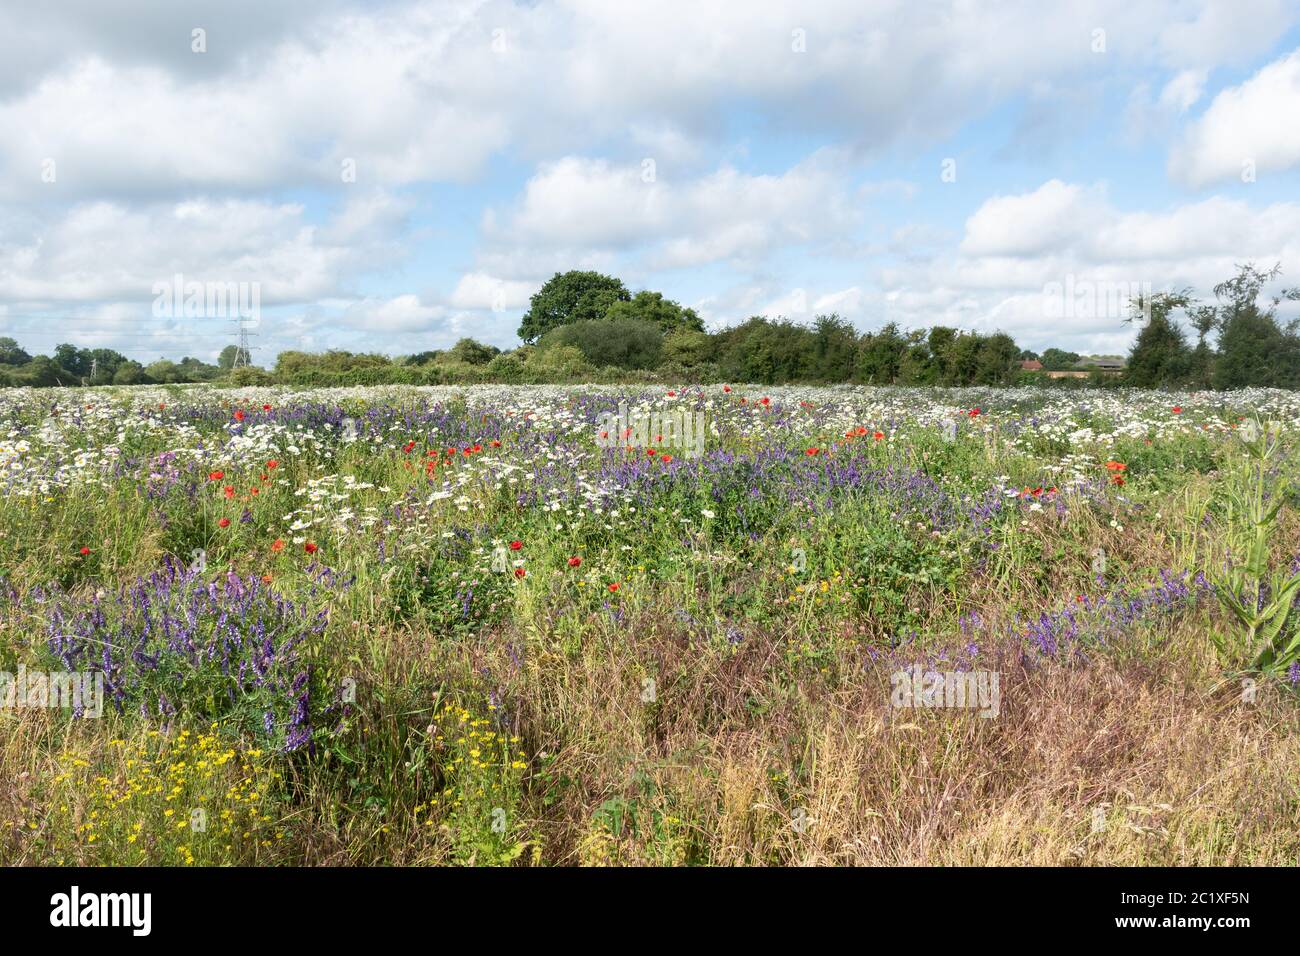 Wildflower meadow in Hampshire, UK, with colourful wildflowers including red poppies, tufted vetch and oxeye daisies. Summer countryside landscape. Stock Photo